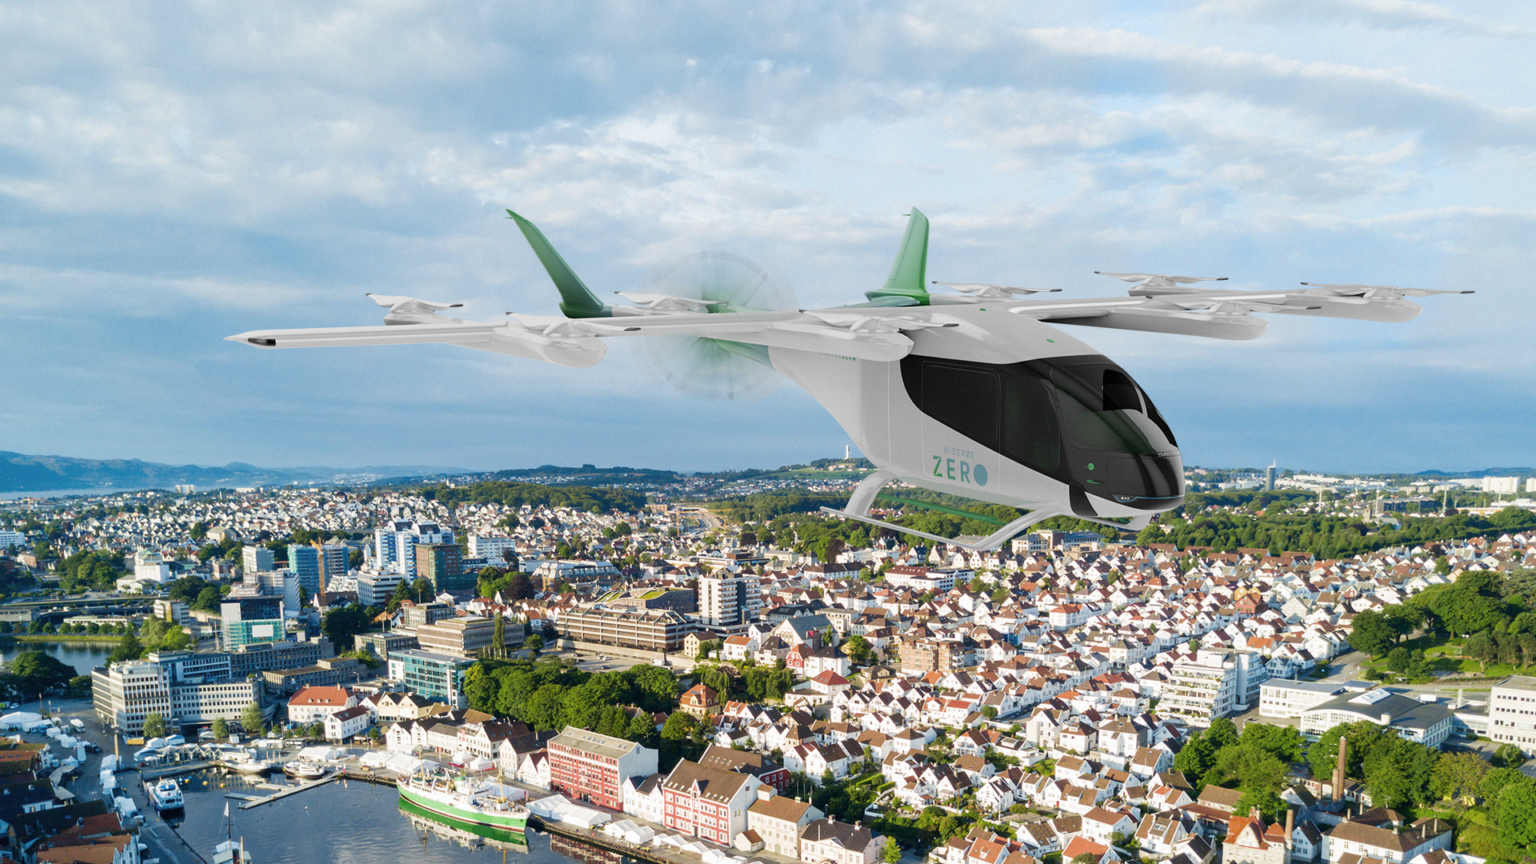 Eve Air Mobility eVTOL aircraft flying